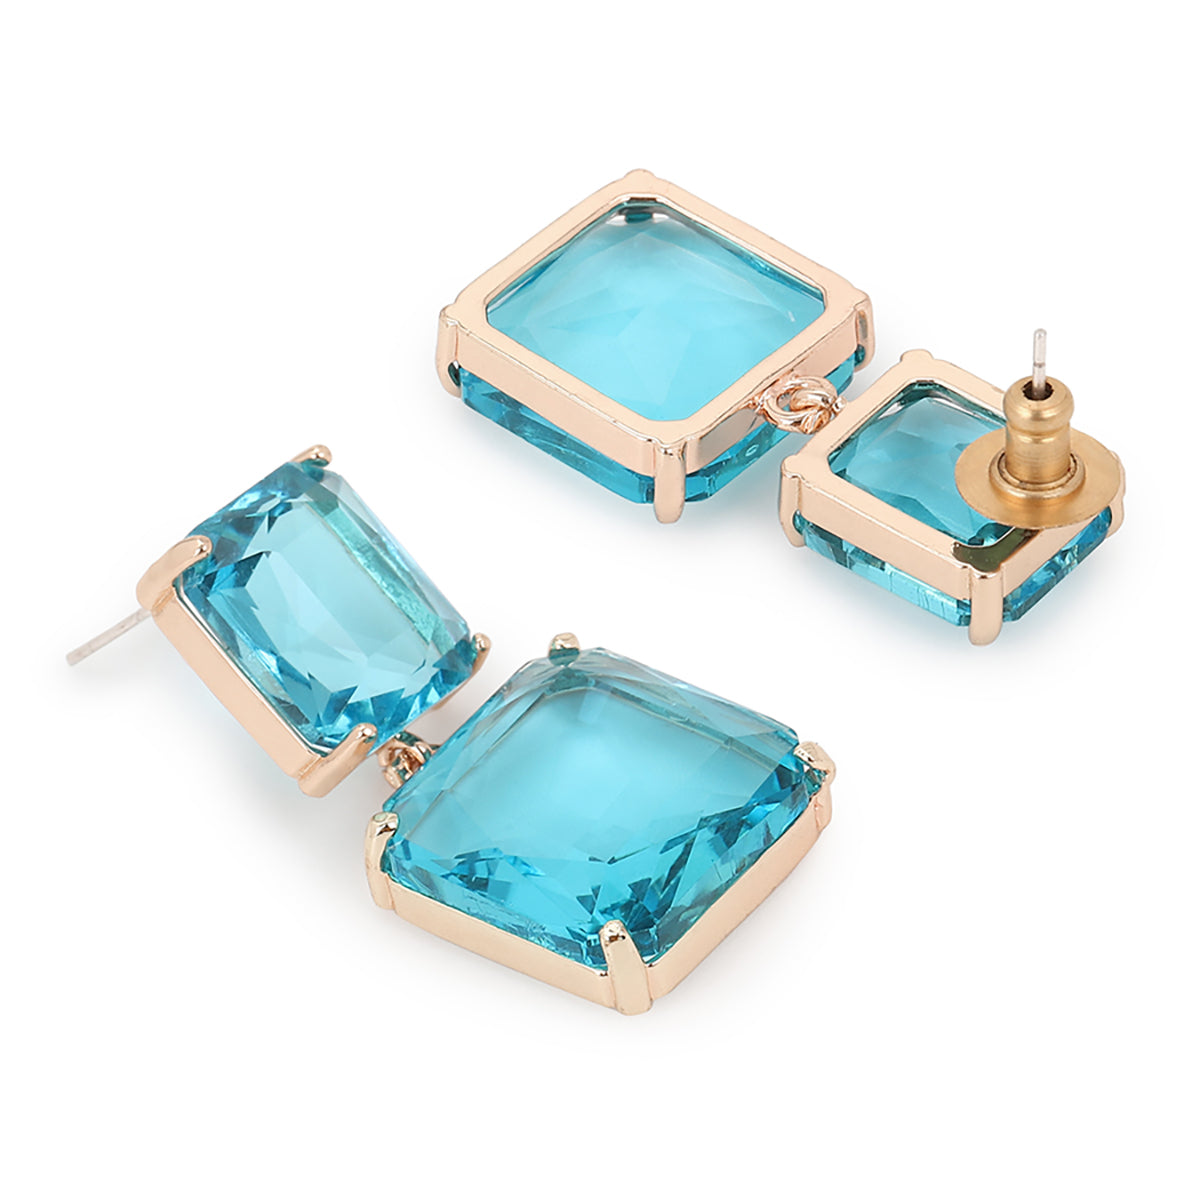 Blue Gold-Plated Contemporary Drop Earrings